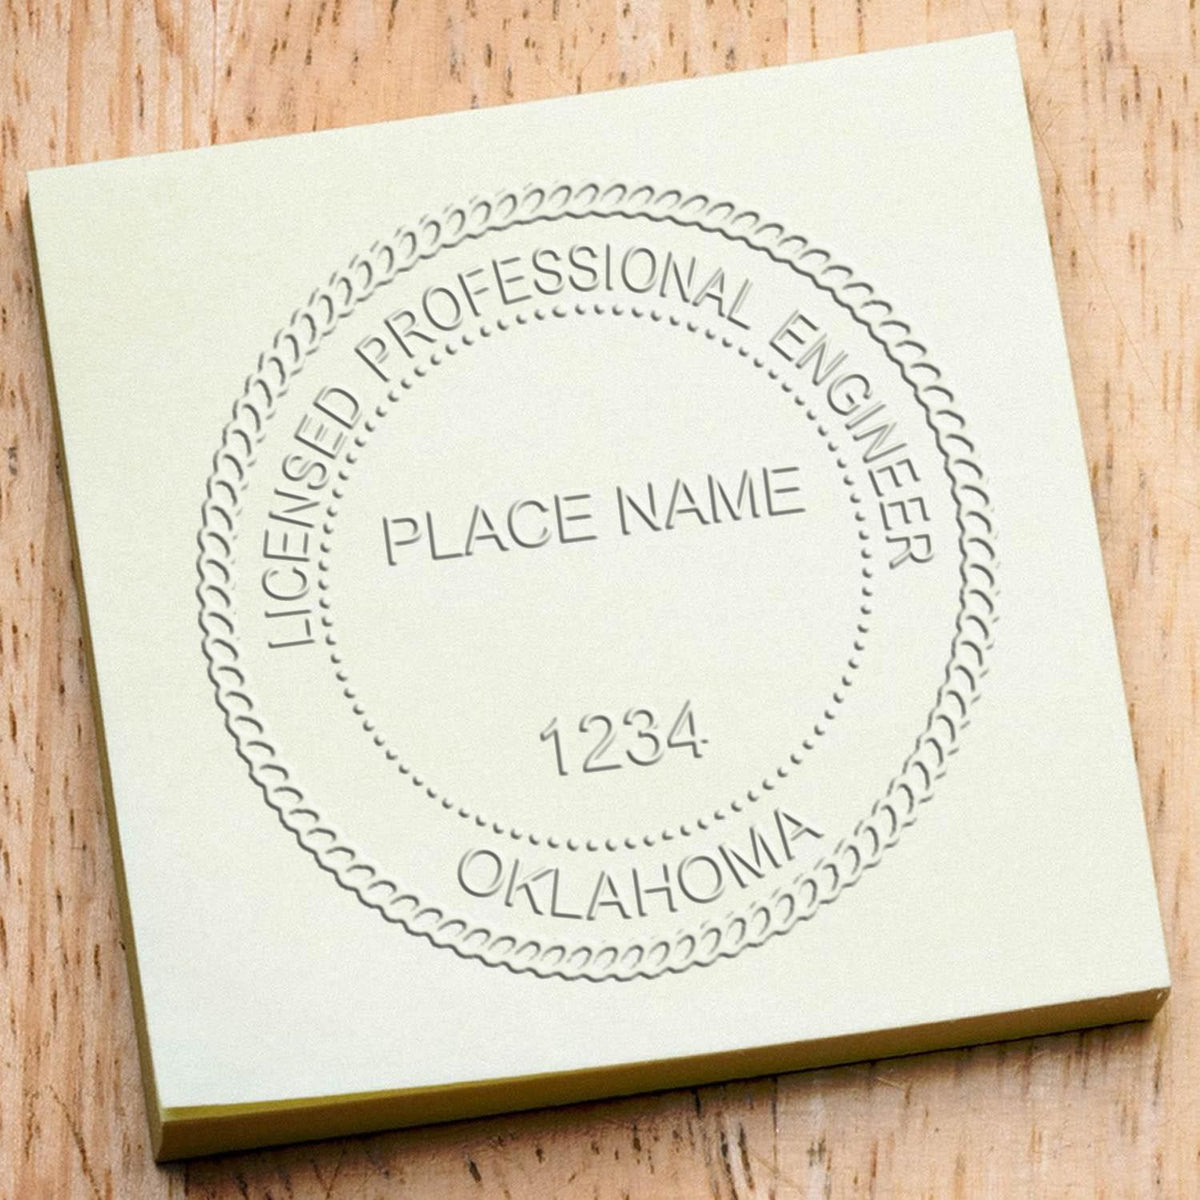 The Heavy Duty Cast Iron Oklahoma Engineer Seal Embosser stamp impression comes to life with a crisp, detailed photo on paper - showcasing true professional quality.